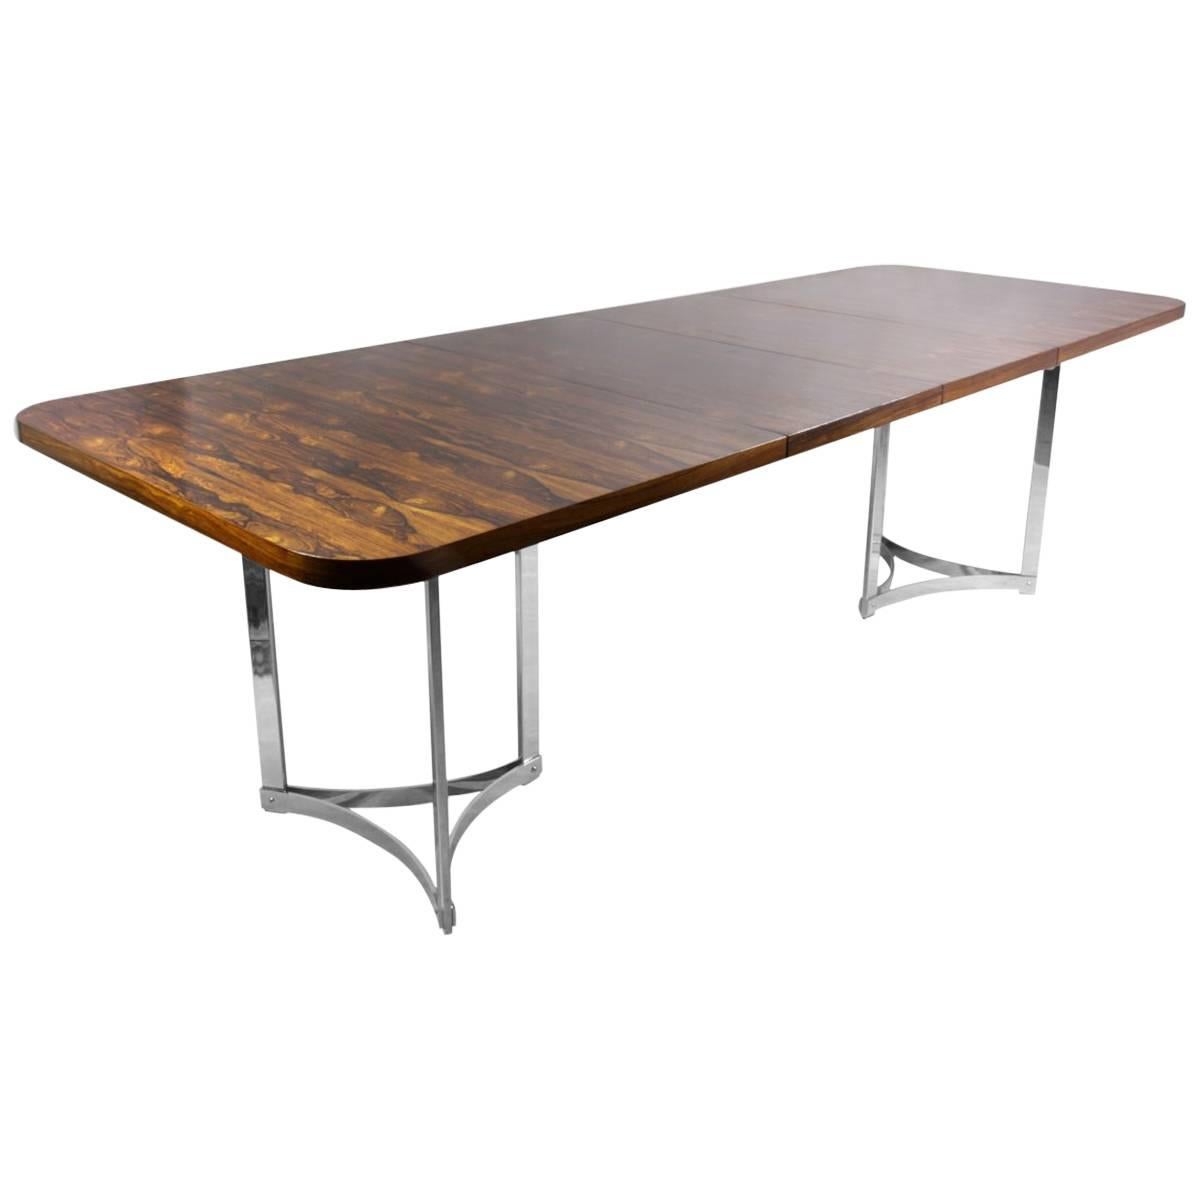 Rosewood and Chrome Dining Table by Merrow Associates